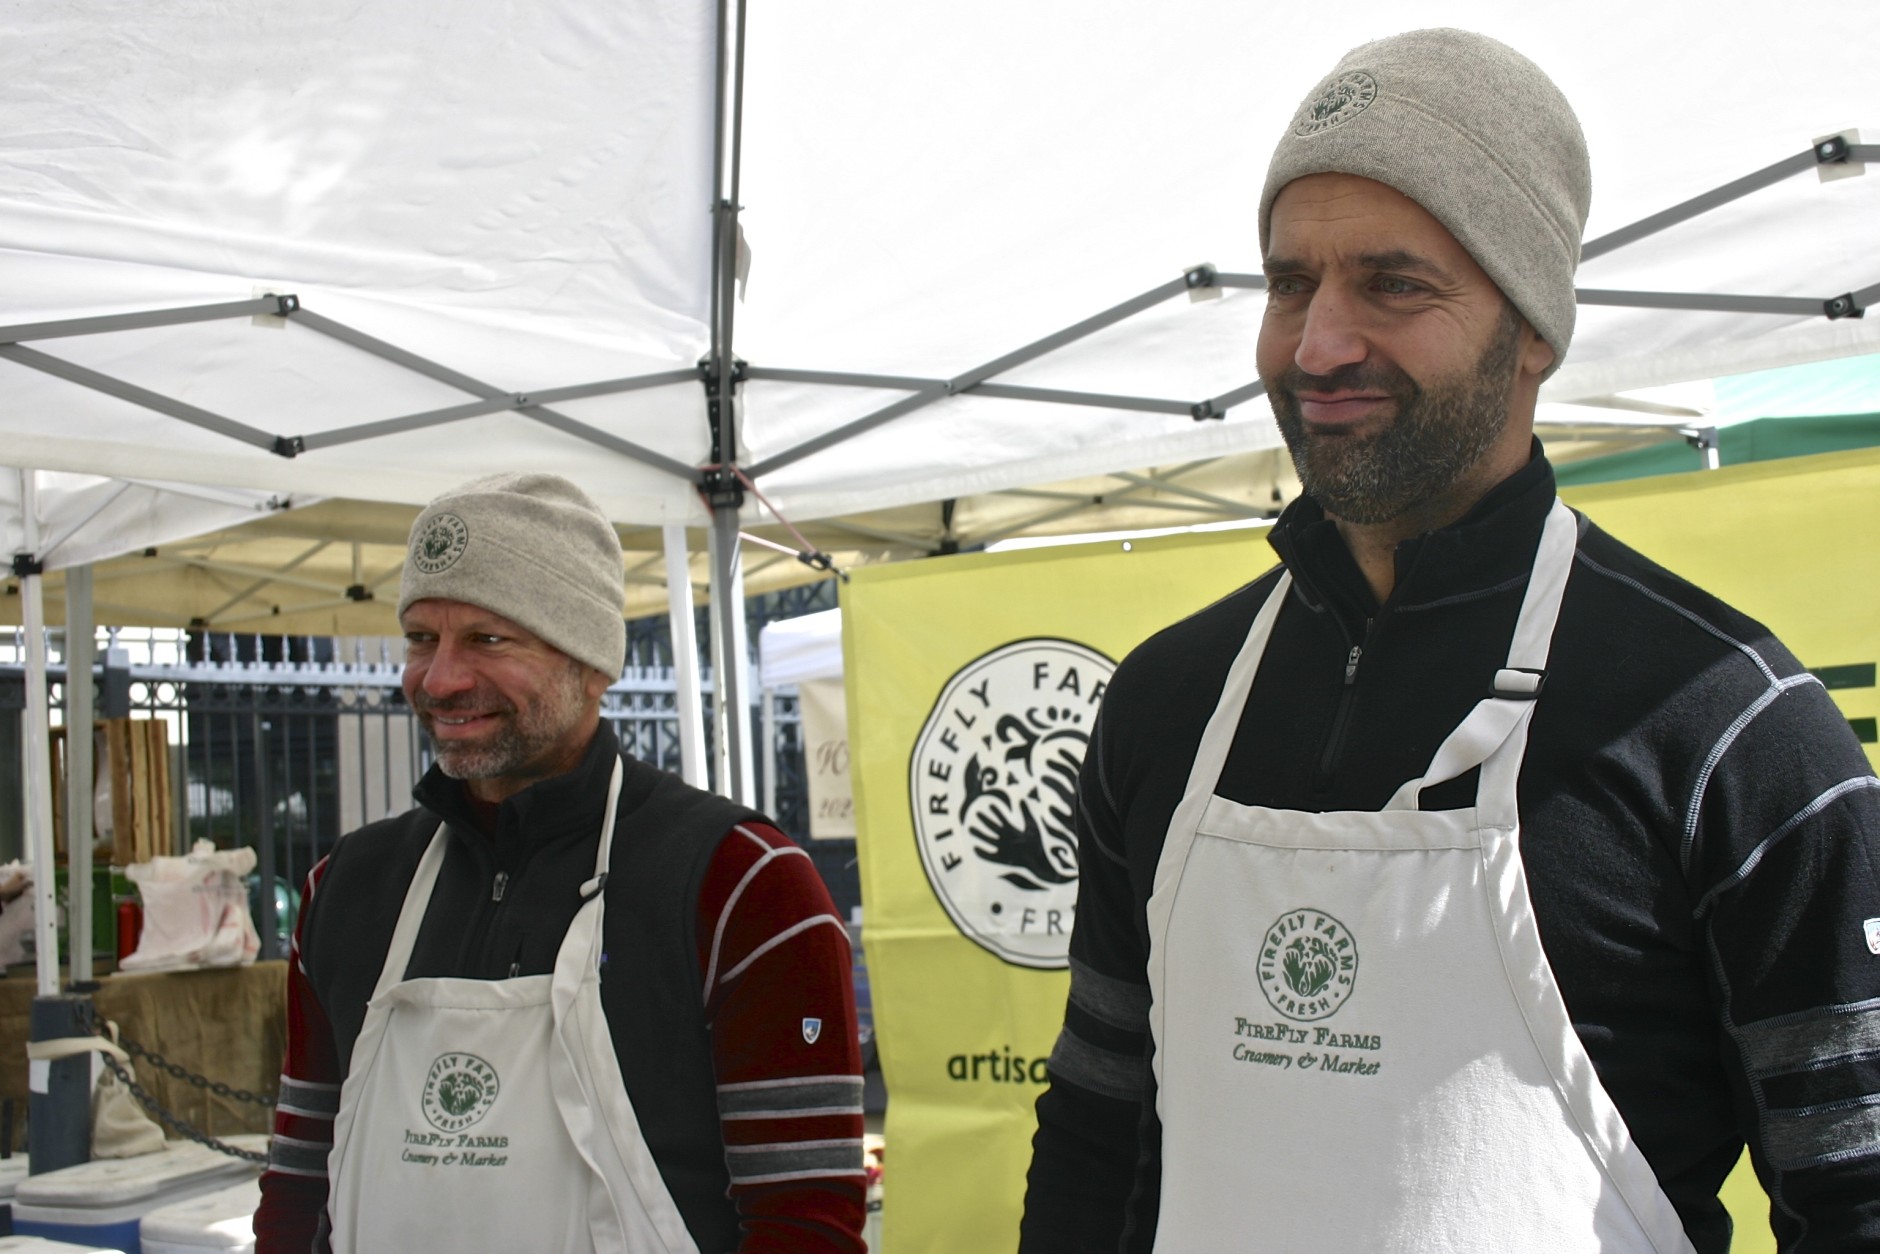 When you go to the farmer's market at Dupont Circle on Sunday mornings, you'll probably meet Michael Koch and Pablo Solanet of Firefly Farms, producers of locally made goat cheeses. (WTOP/Kate Ryan)